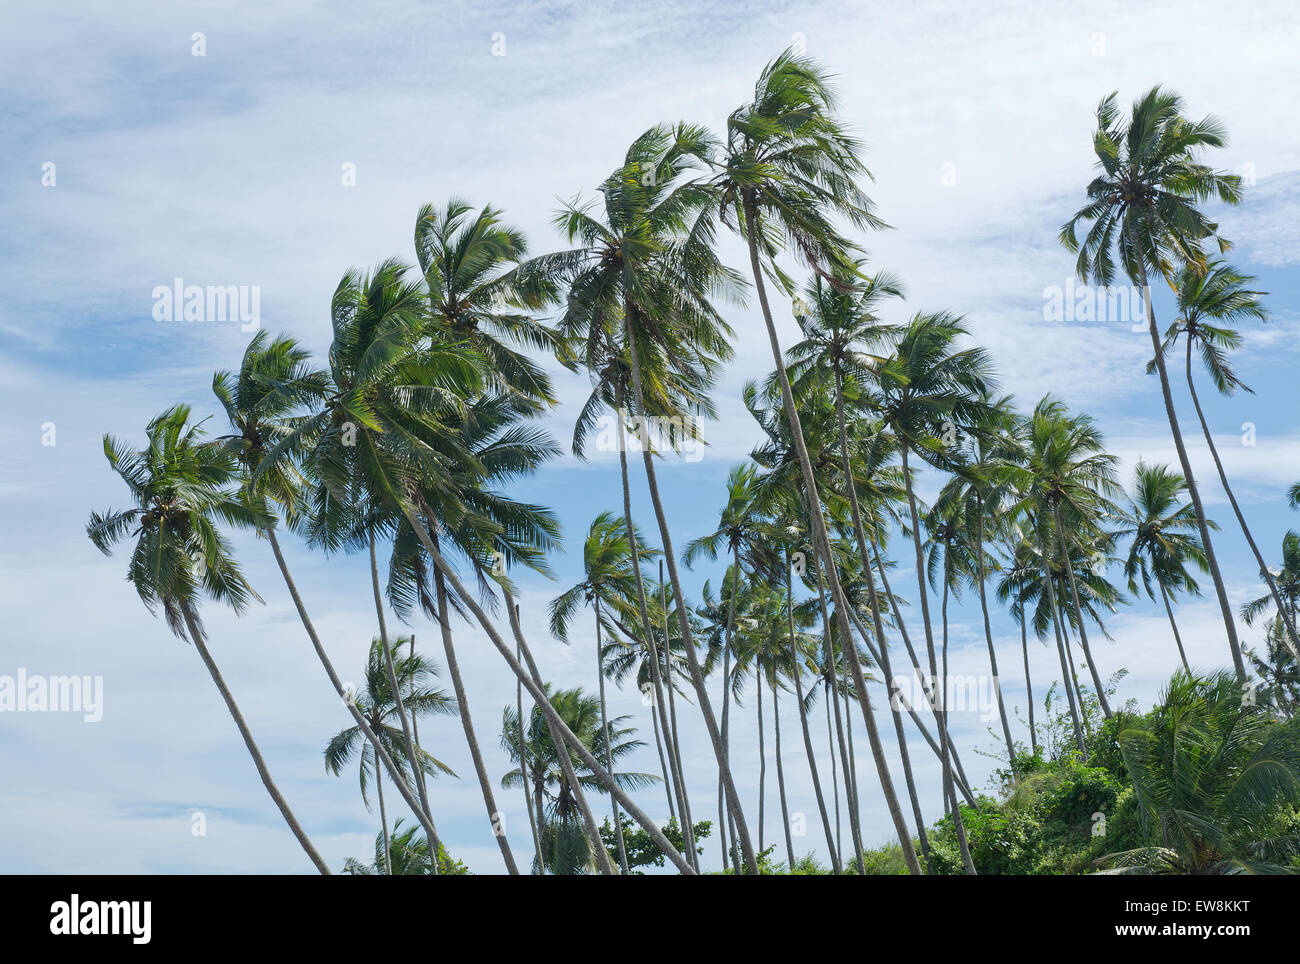 Coconut palm trees and sky in remote location, Southern Province, Sri Lanka, Asia. Stock Photo